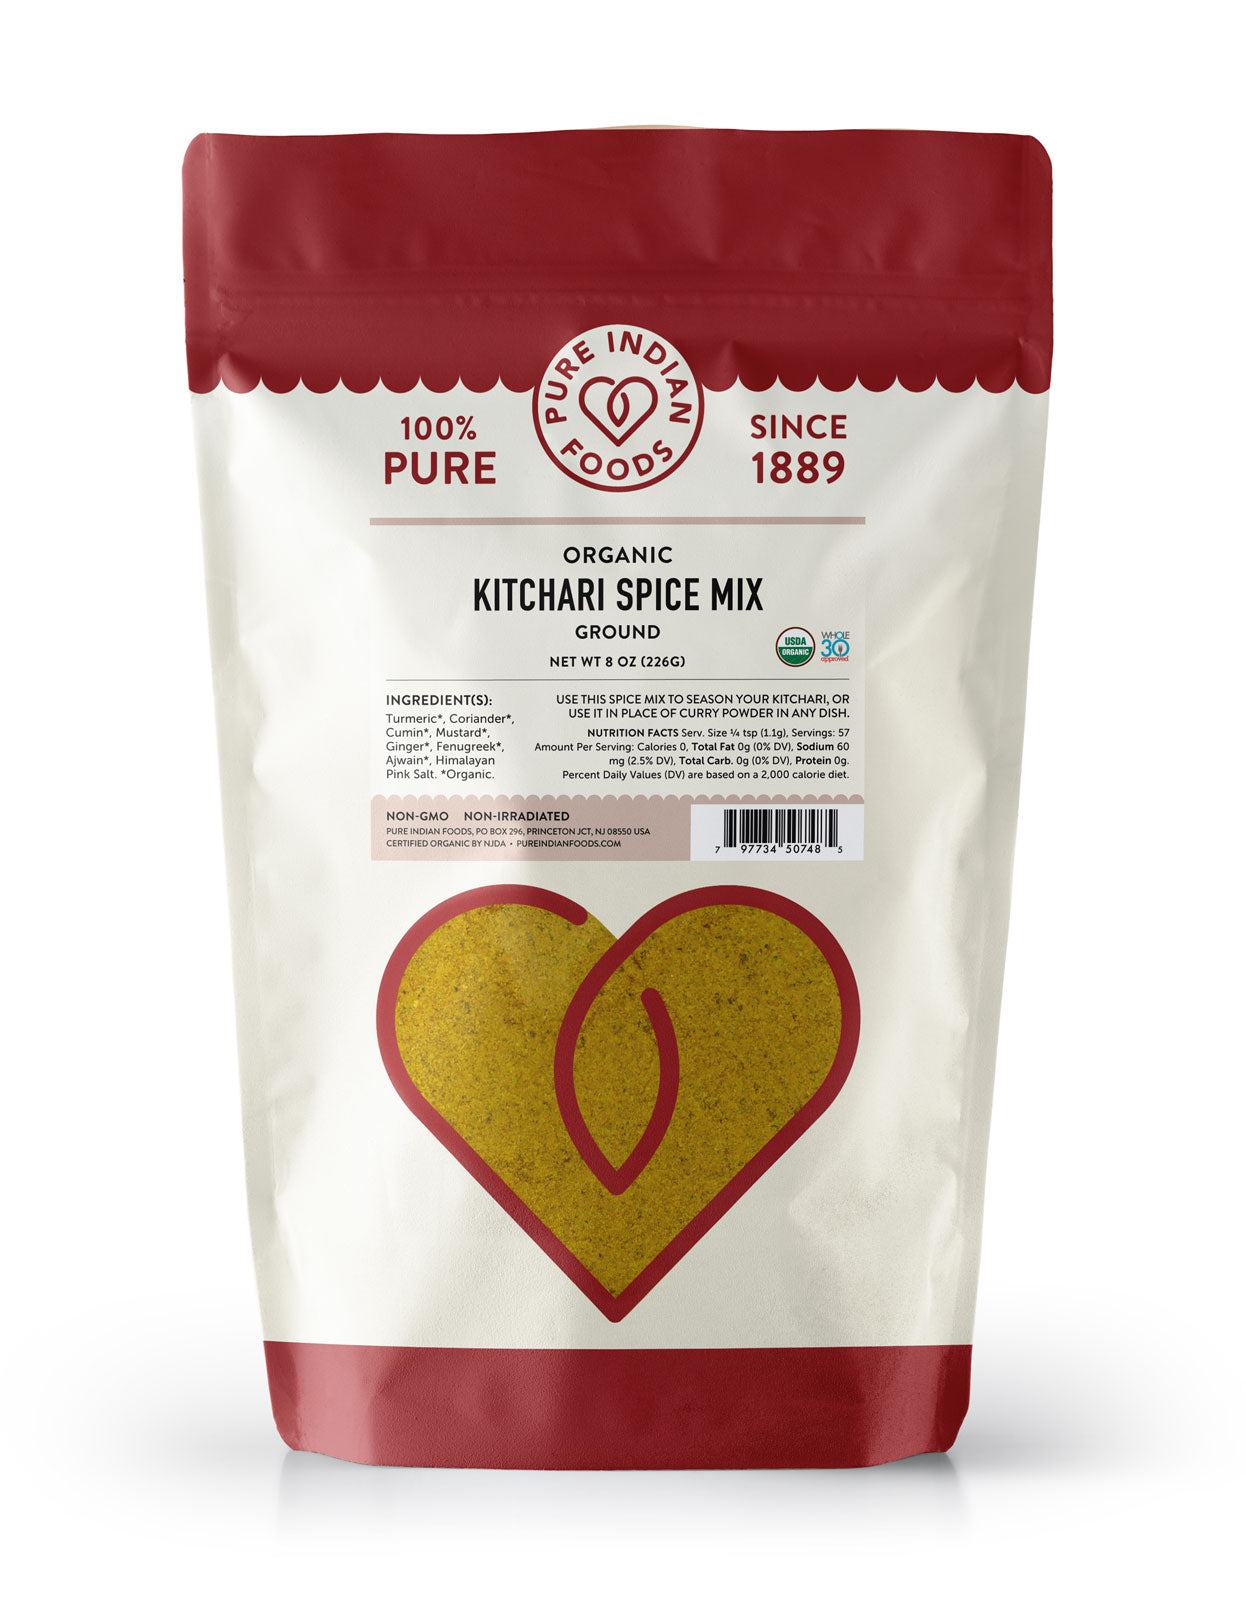 8 oz bag of Pure Indian Foods Kitchari spice mix, organic and ground